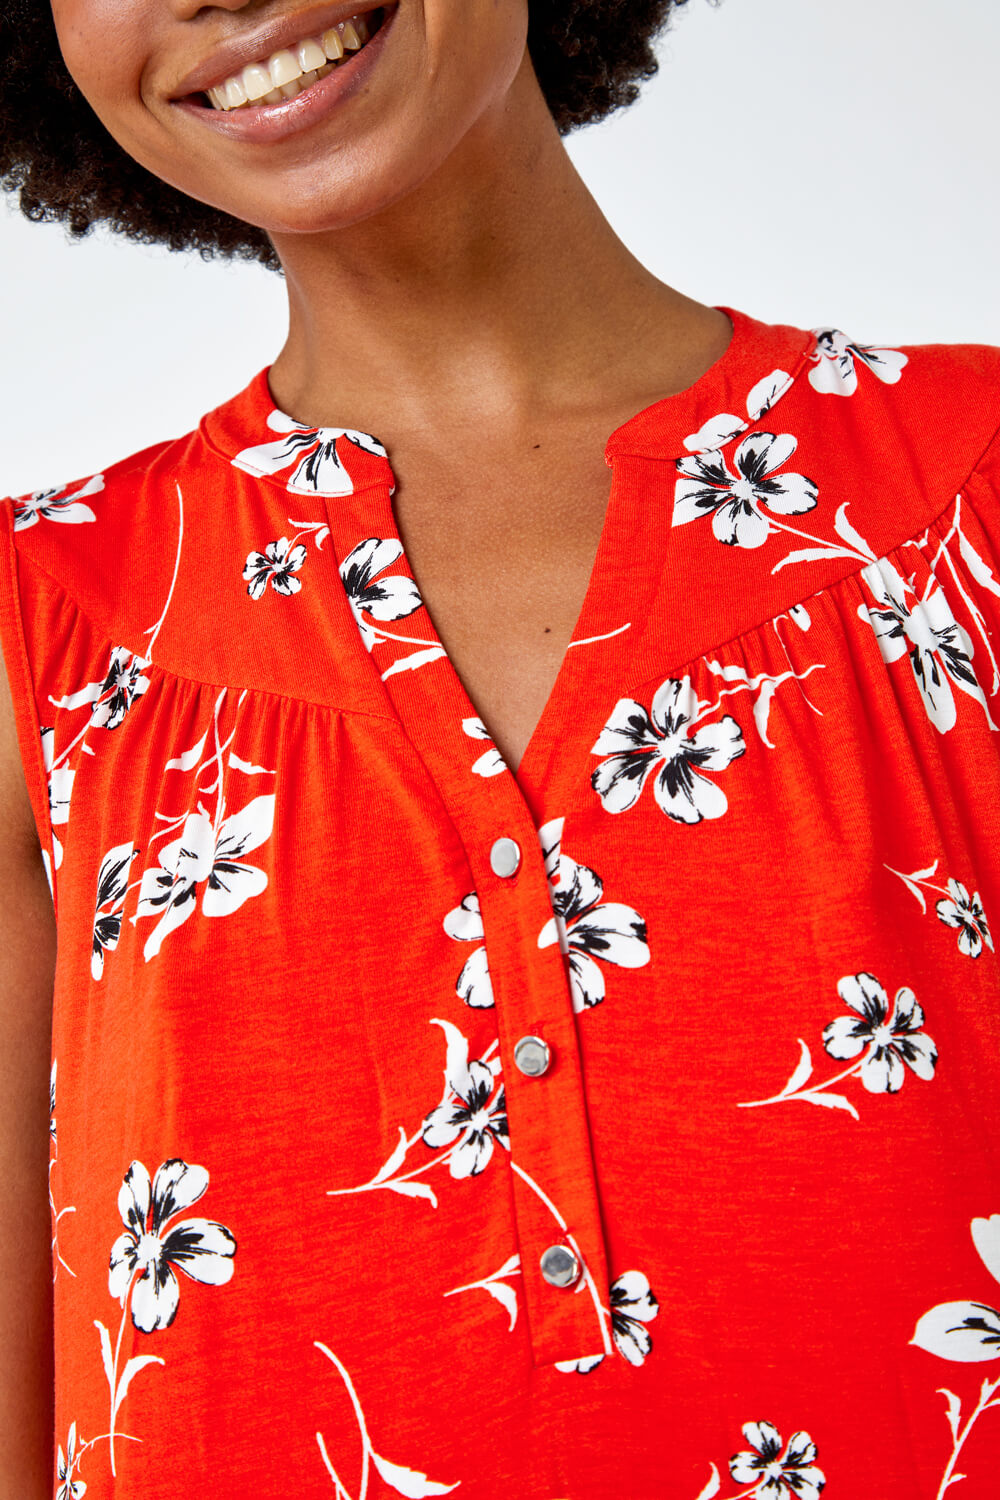 Red Sleeveless Floral Print Top, Image 5 of 5